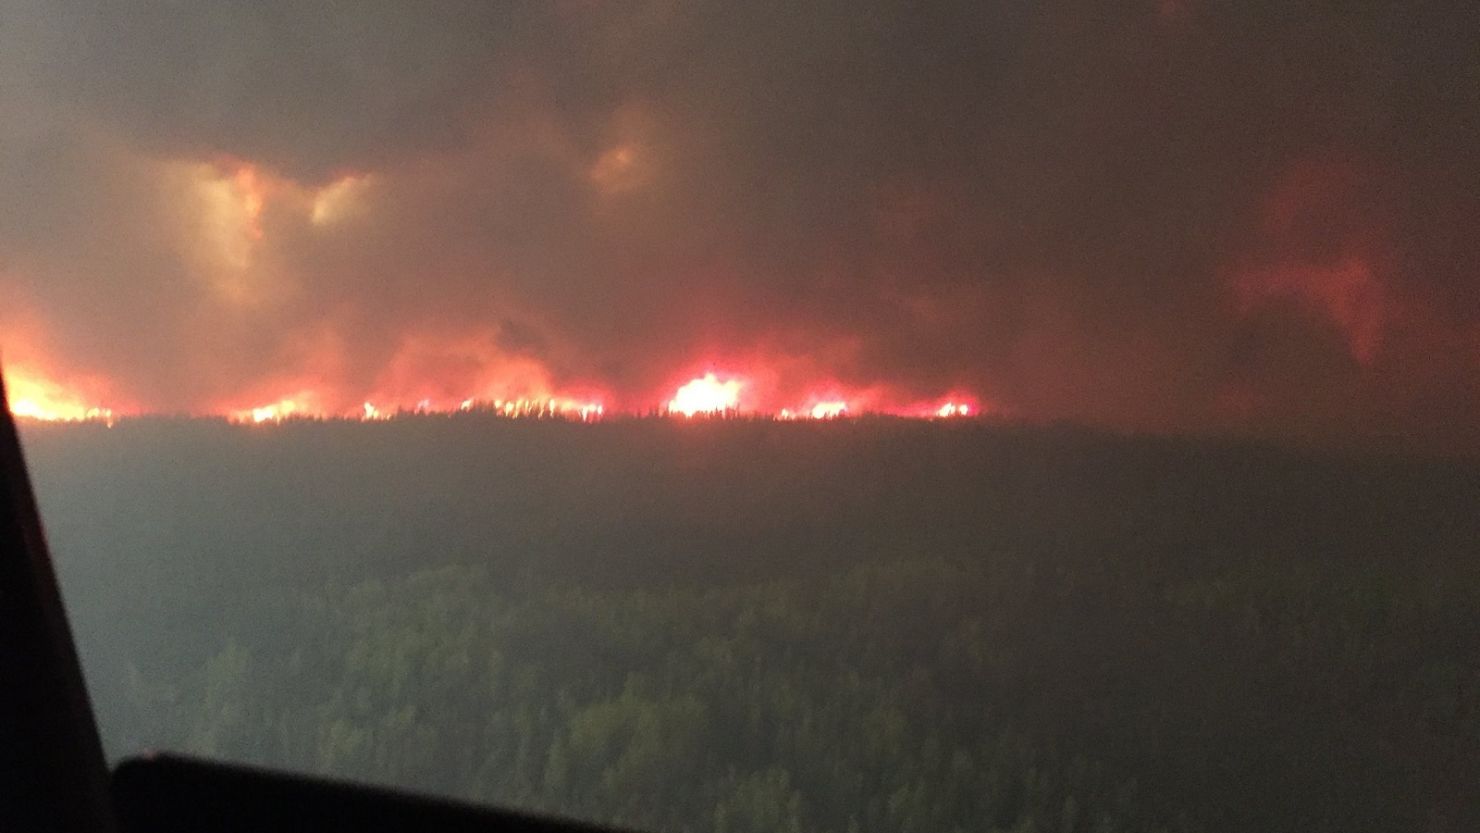 The Chuckegg Creek Wildfire in northern Alberta has burned nearly 200,000 acres, according to the Alberta government.